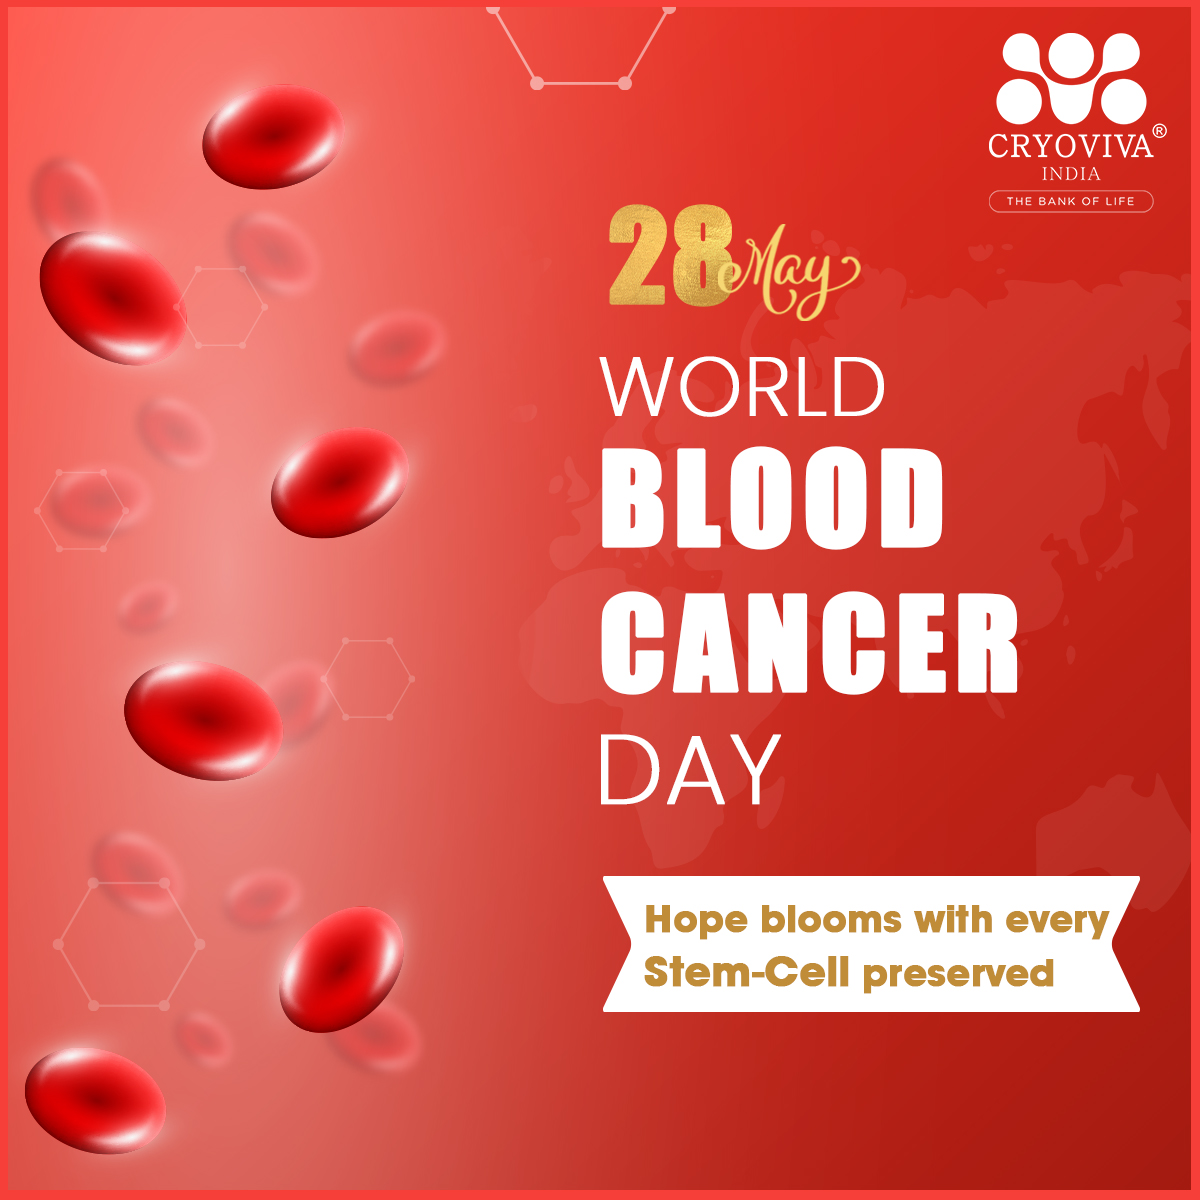 On May 28, World Blood Cancer Day (WBCD) is a global #awareness day dedicated to the fight against blood cancer. Today, #Cryoviva honor the strength of those fighting blood cancer.

#wordbloodcancerday #wbcd #cancerdayawareness #cordblood #cordbloodbanking #wellbeing